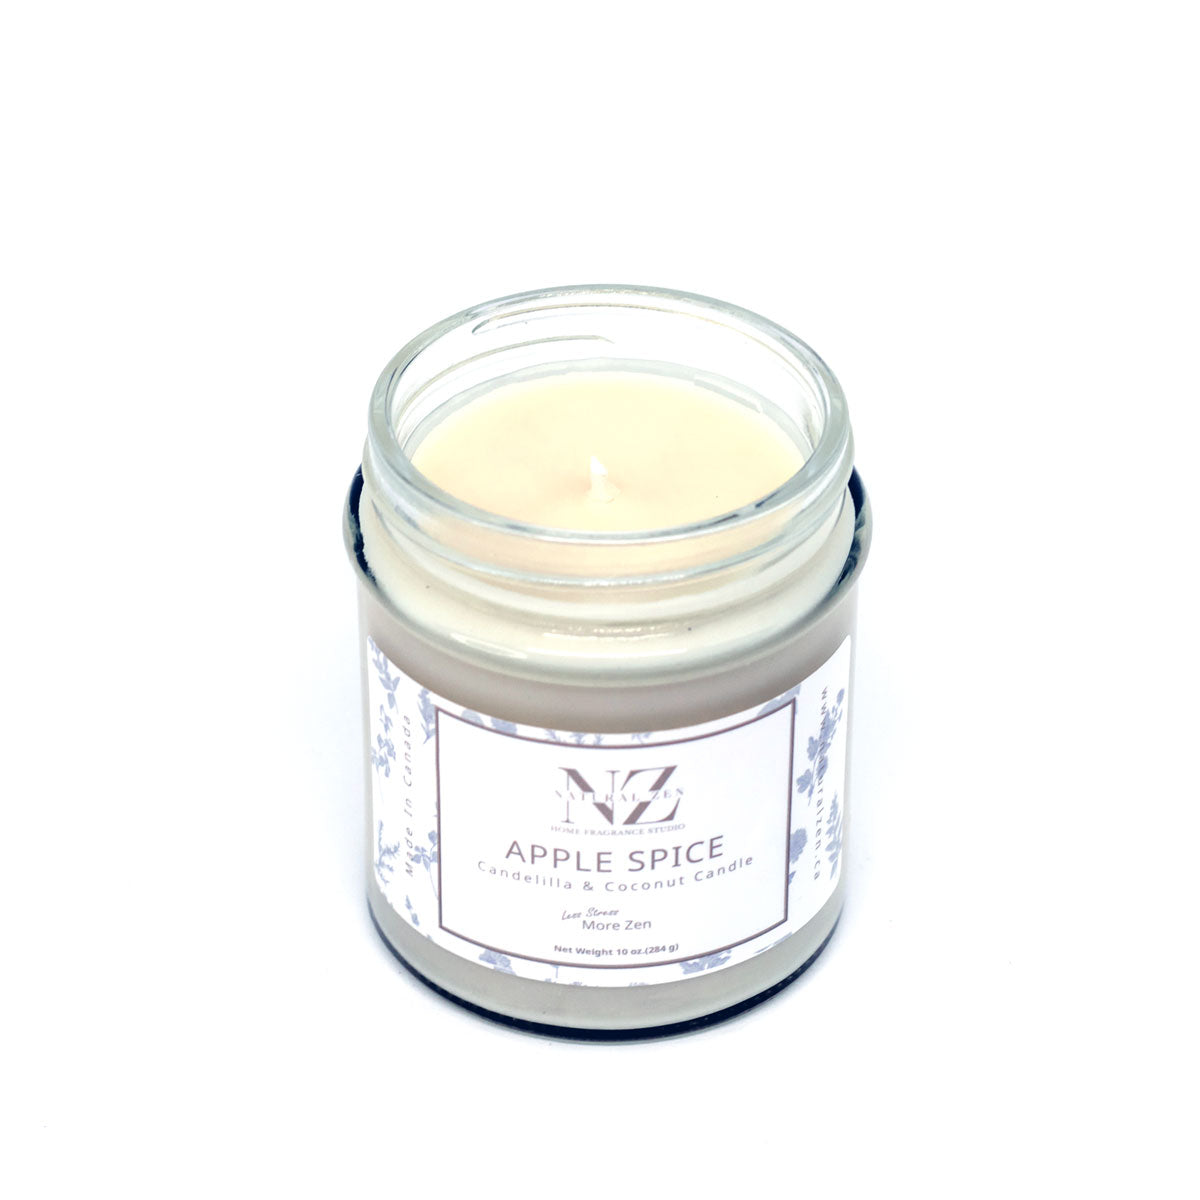 Apple Spice Luxury Scented Jar Candle